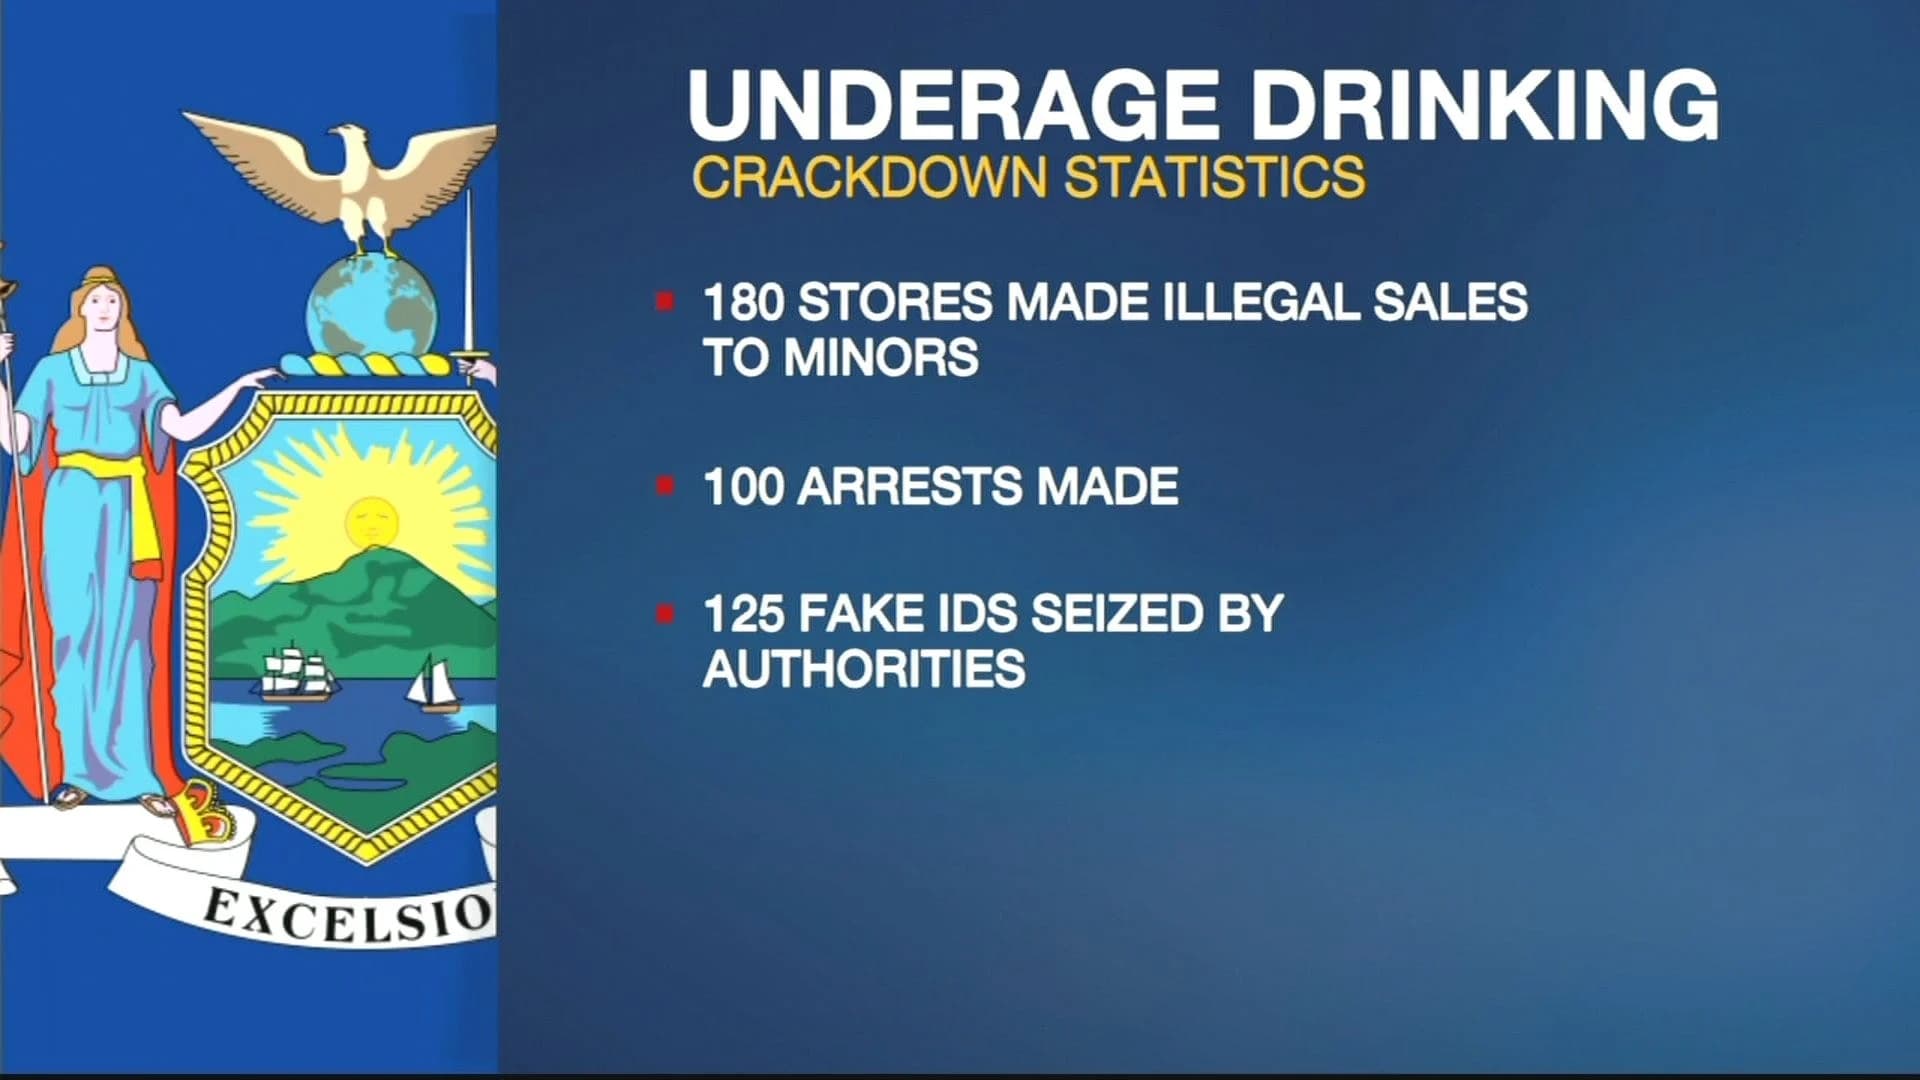 Crackdown on underage drinking leads to 112 arrests in NY